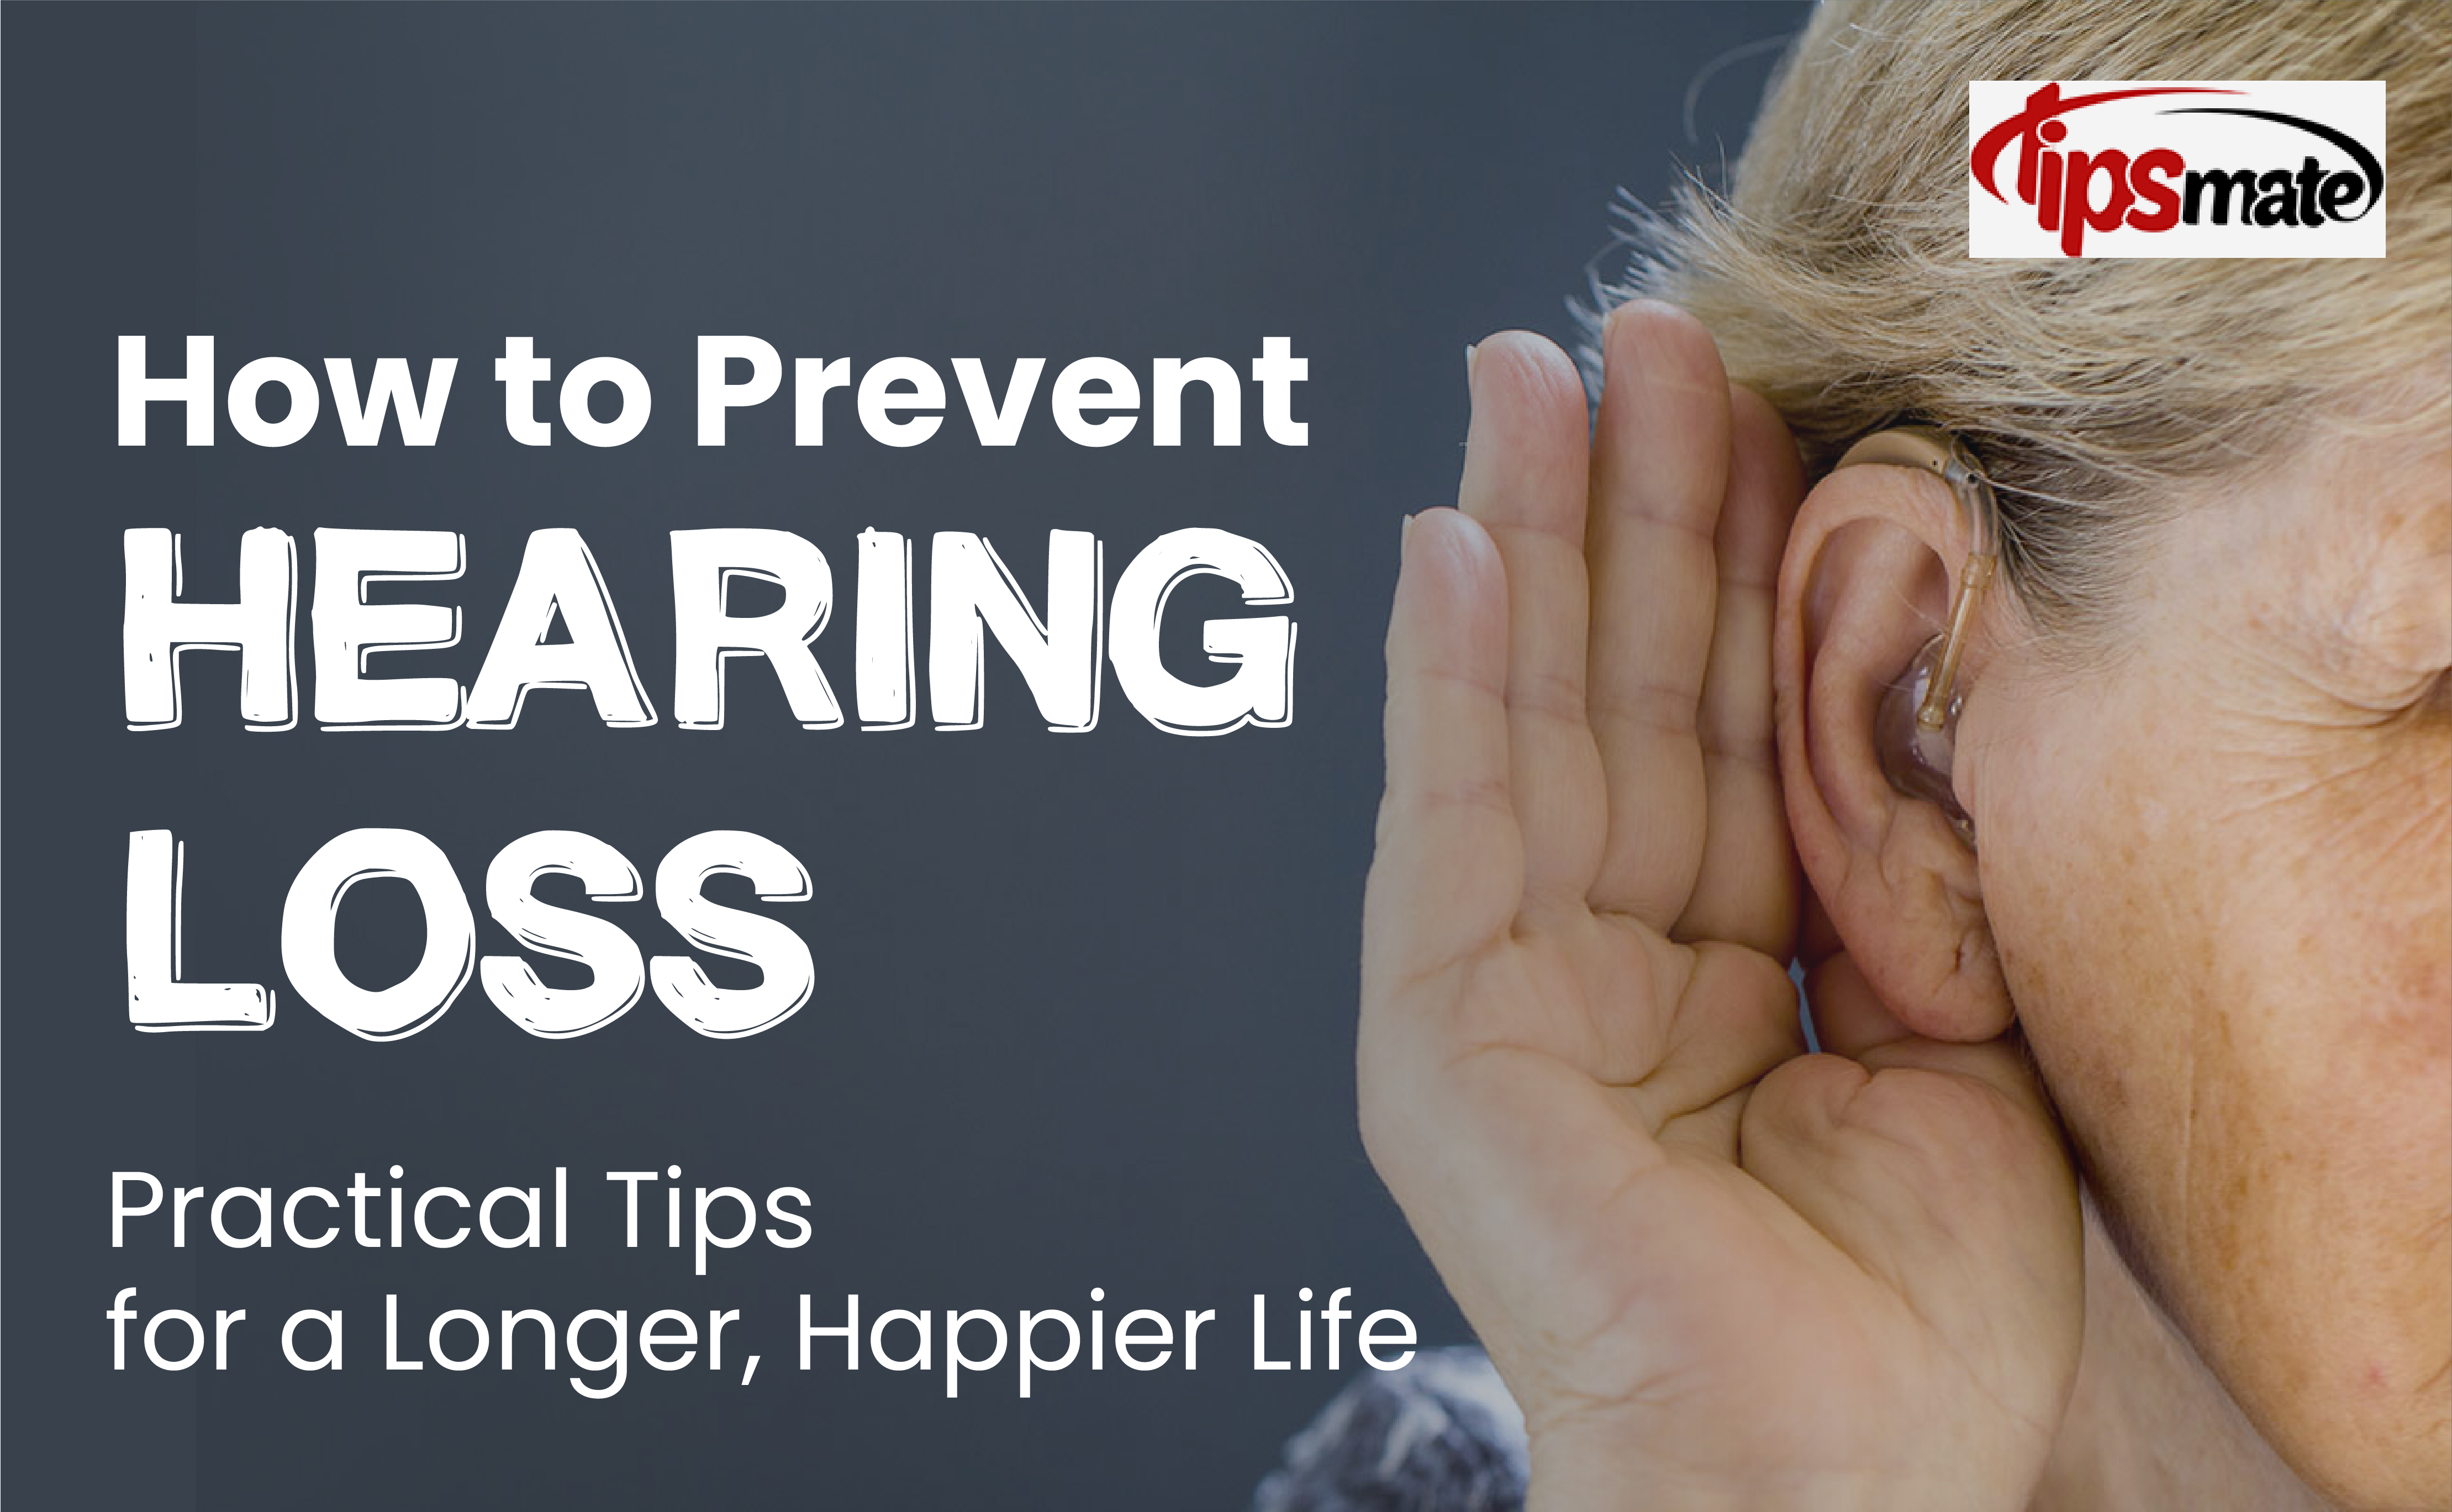 How to Prevent Hearing Loss